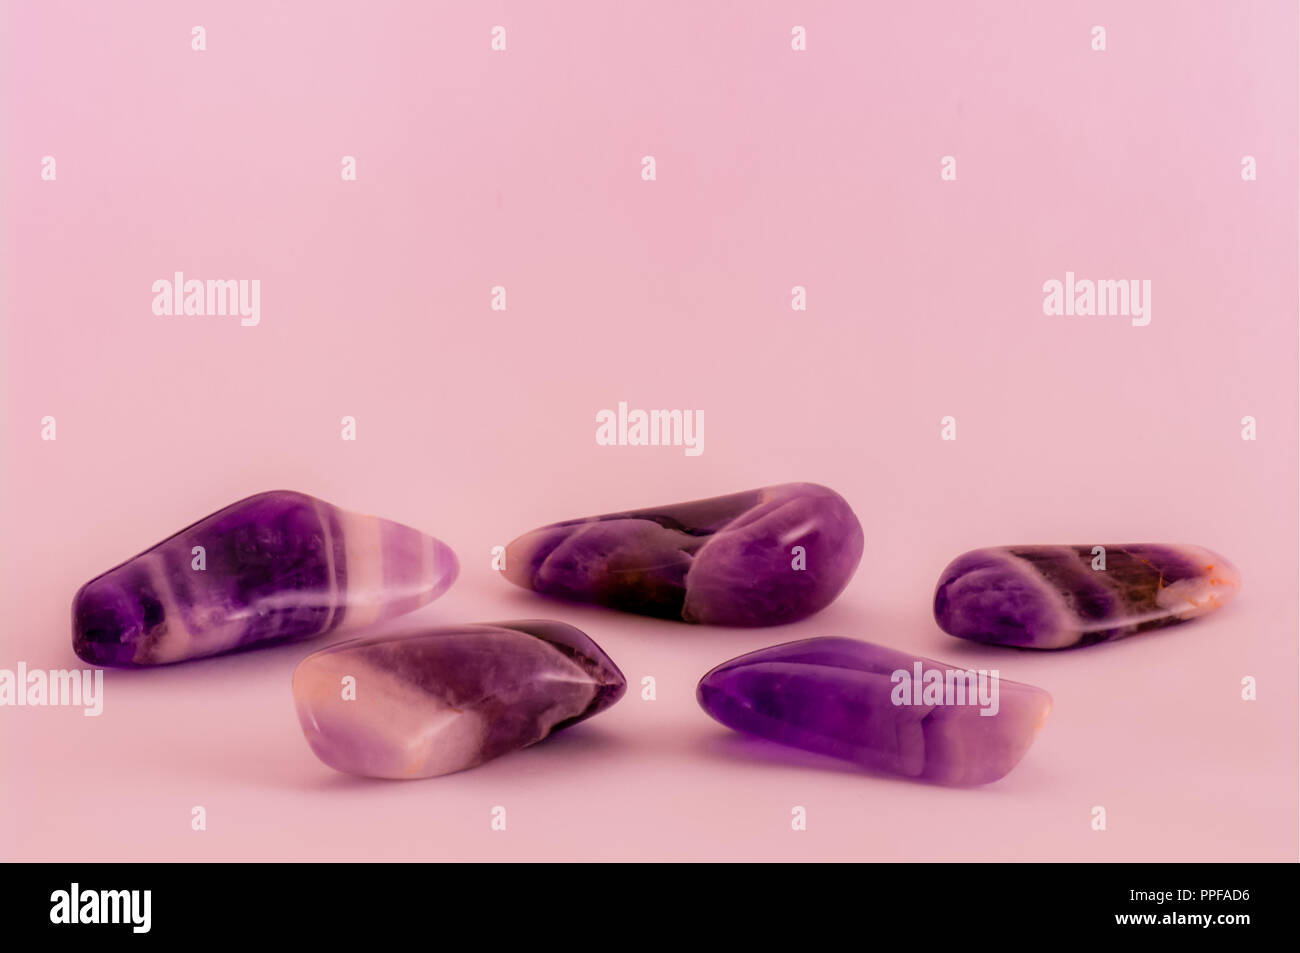 Polished dogtooth amethyst stones background with copy space Stock Photo